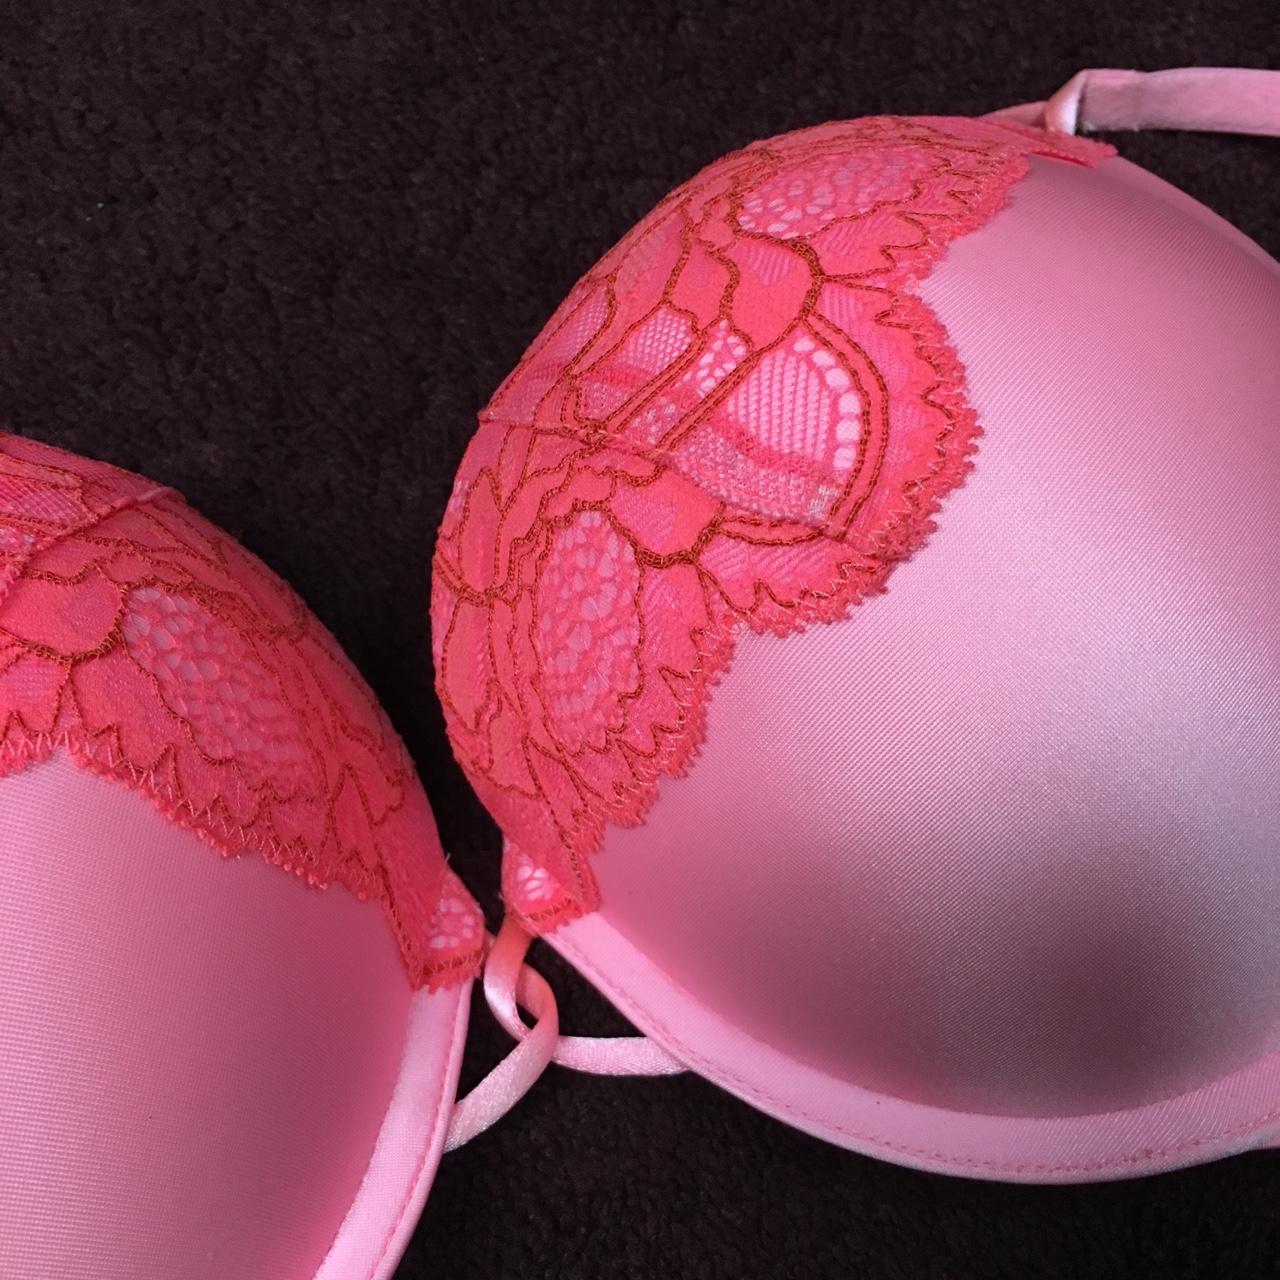 VS PINK Bra Size 34 B Wore Once ( A little small - Depop